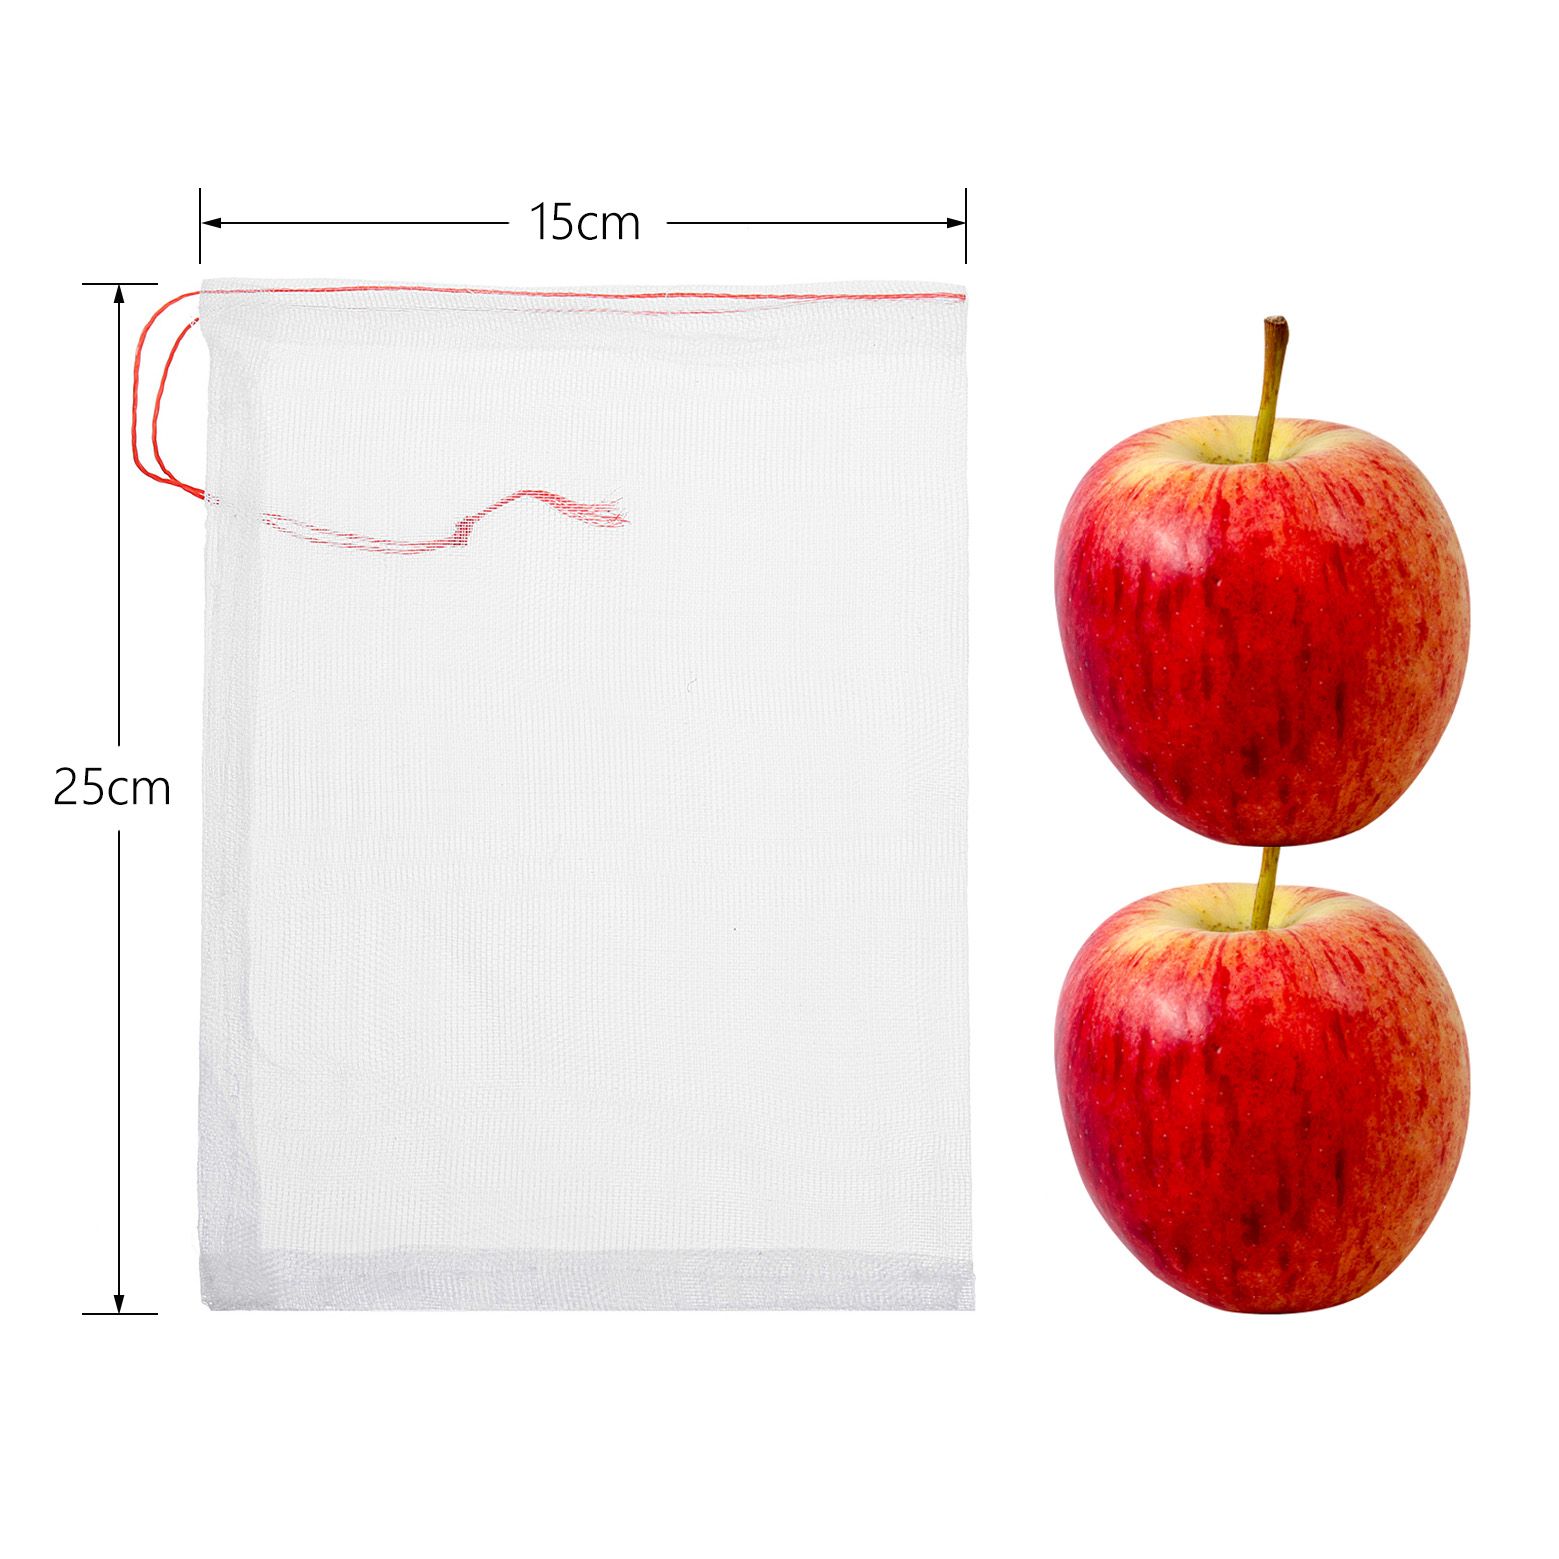 50Pcs-Agriculture-Garden-Drawstring-Mesh-Net-Bag-Fruit-Vegetable-Plant-Protect-Anti-Insect-Bird-1354622